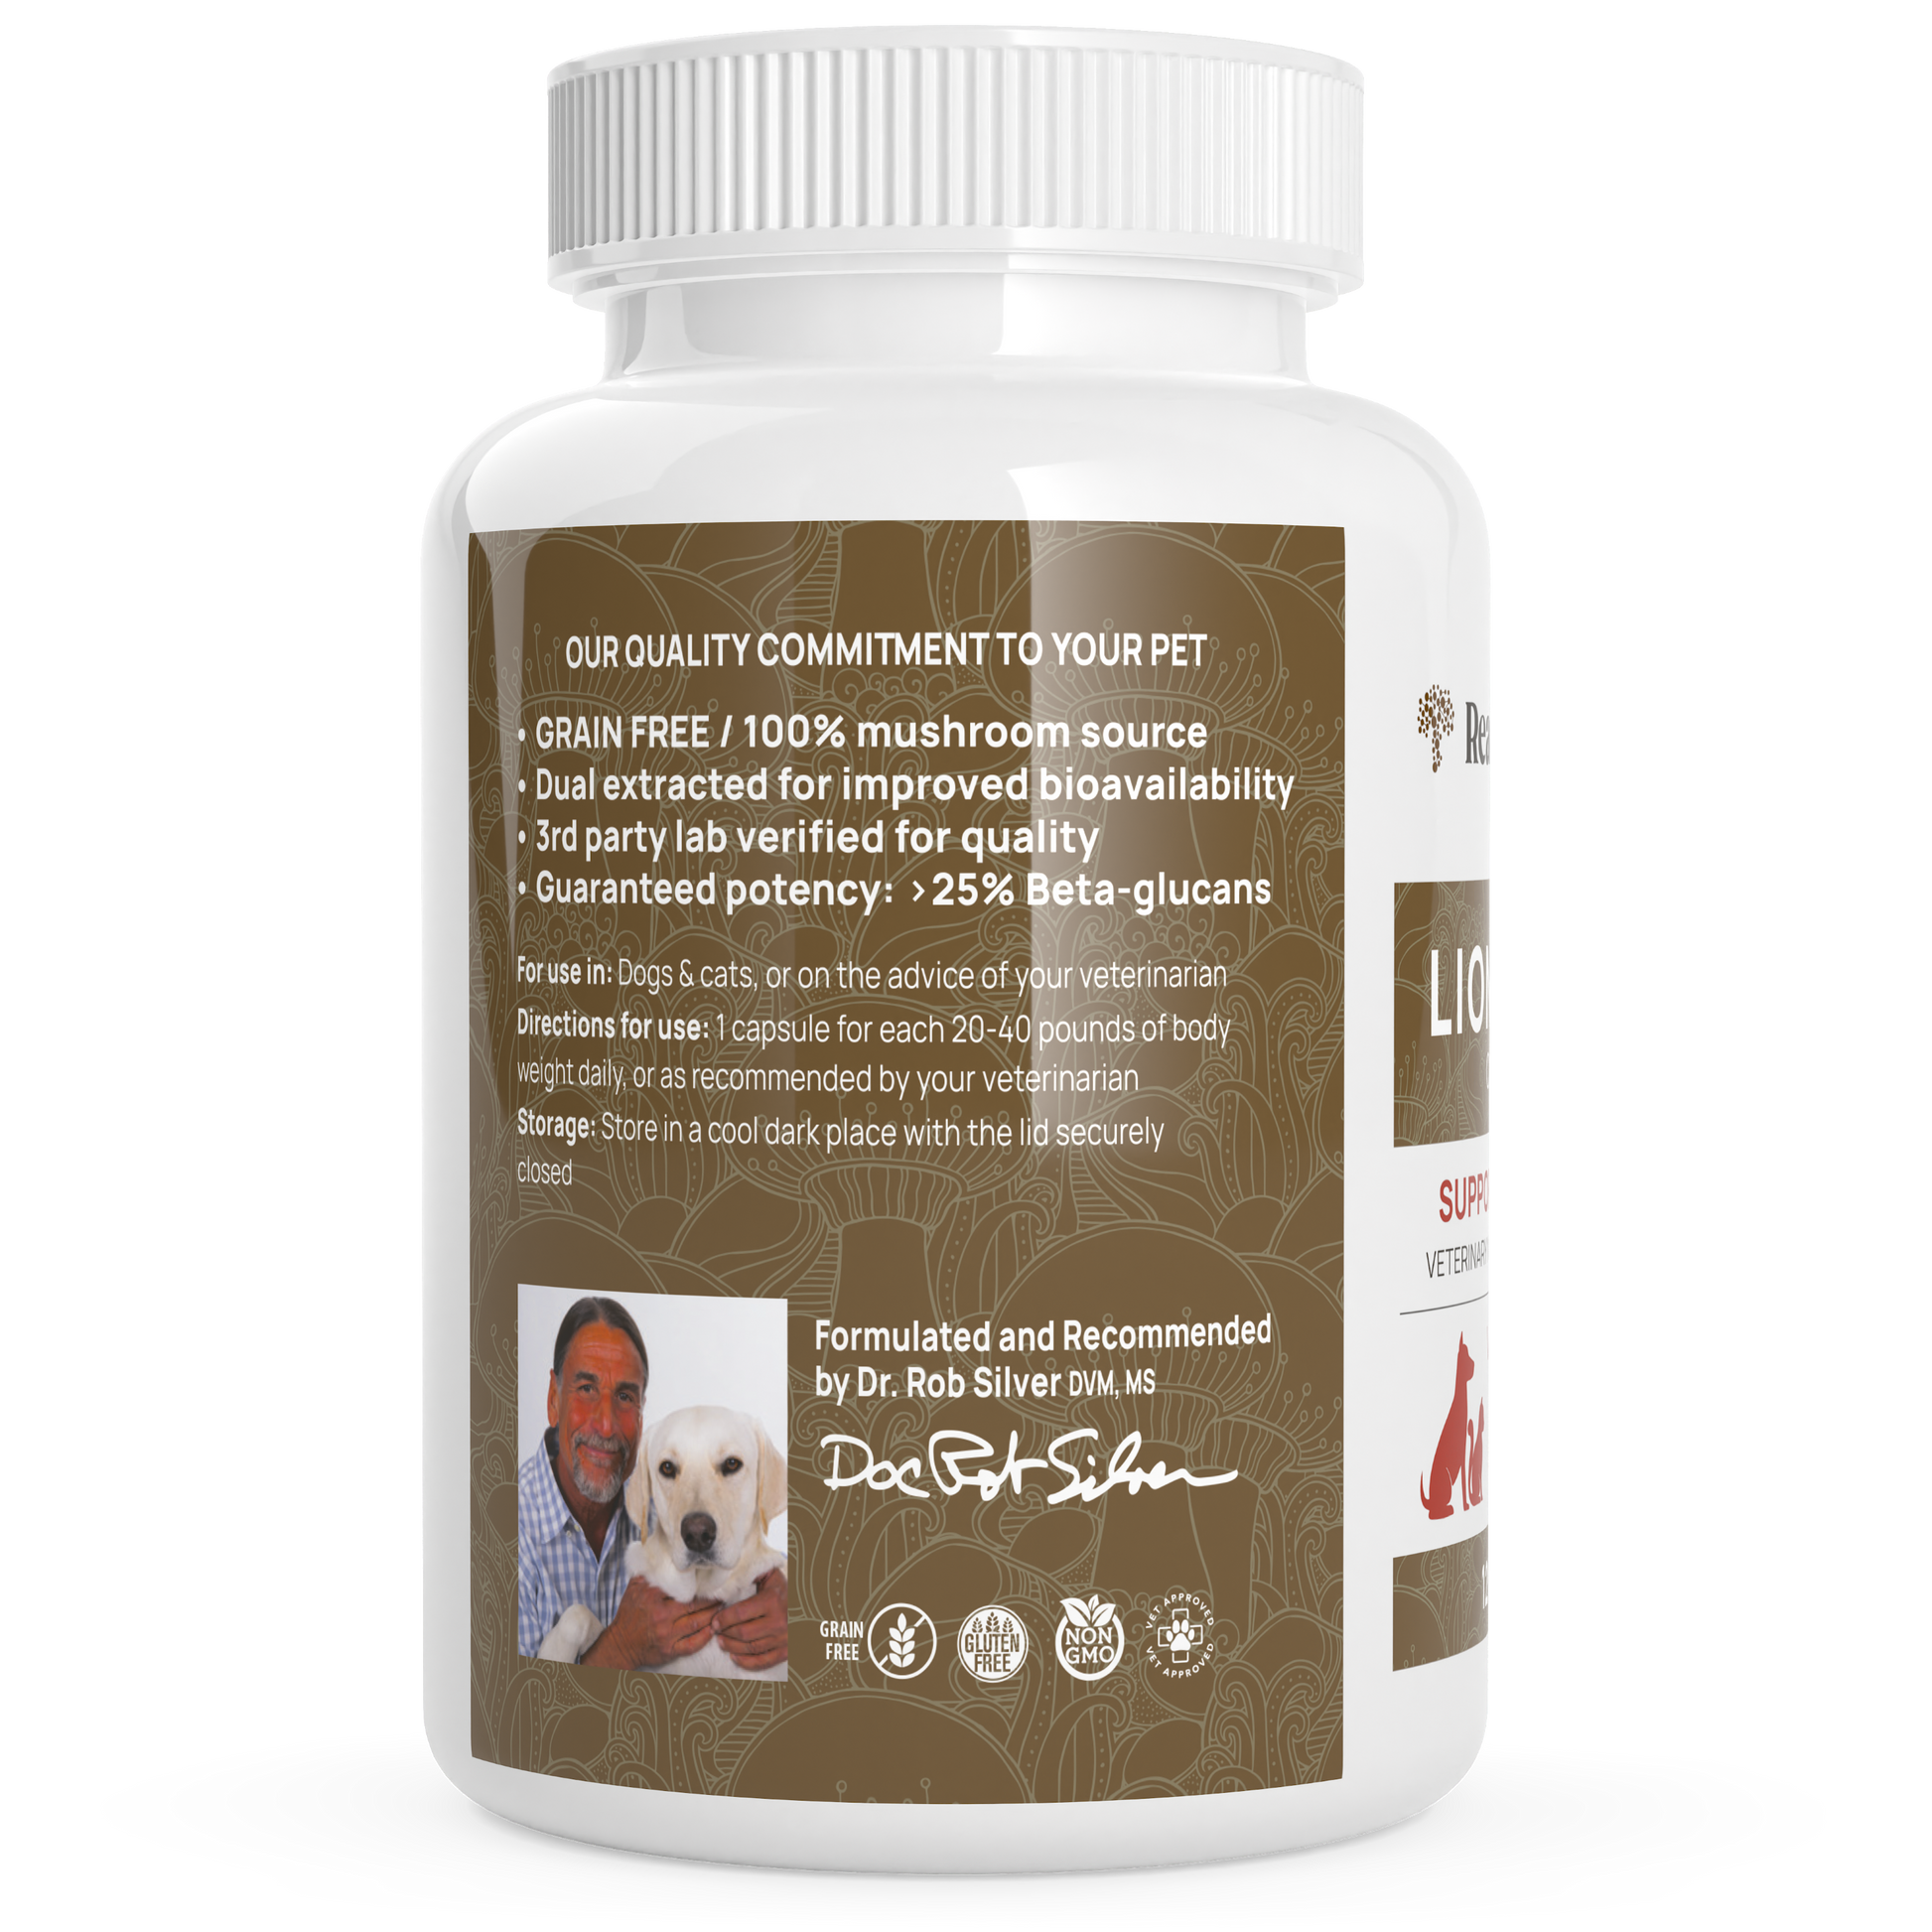 A bottle of Organic Lions Mane Extract Capsules for Pets from Real Mushrooms with a picture of a dog.